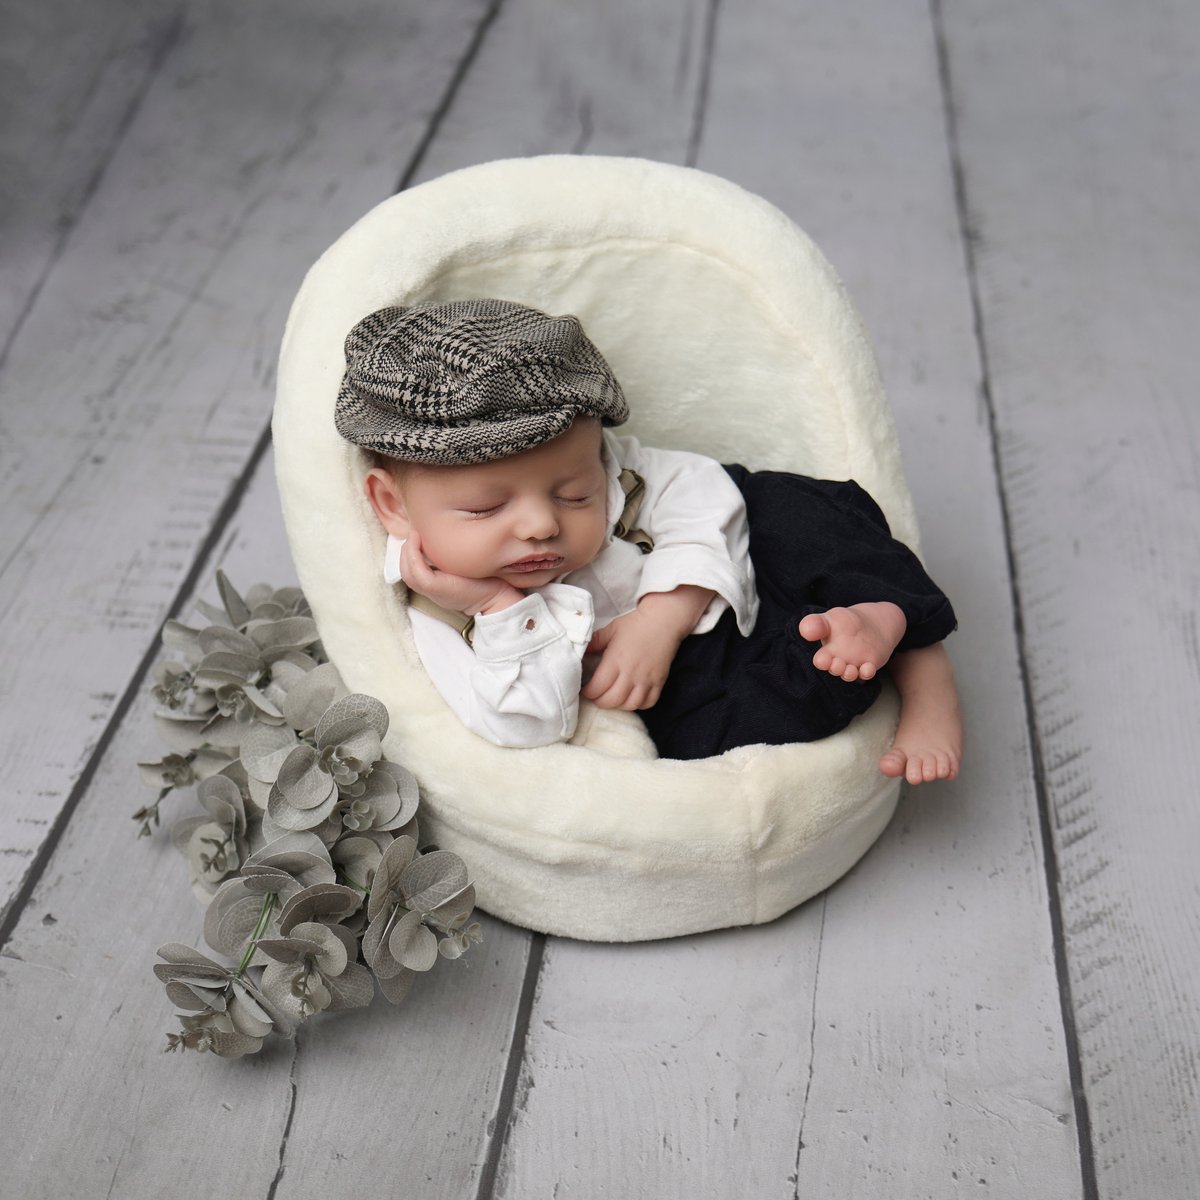 baby posing in small soft chair